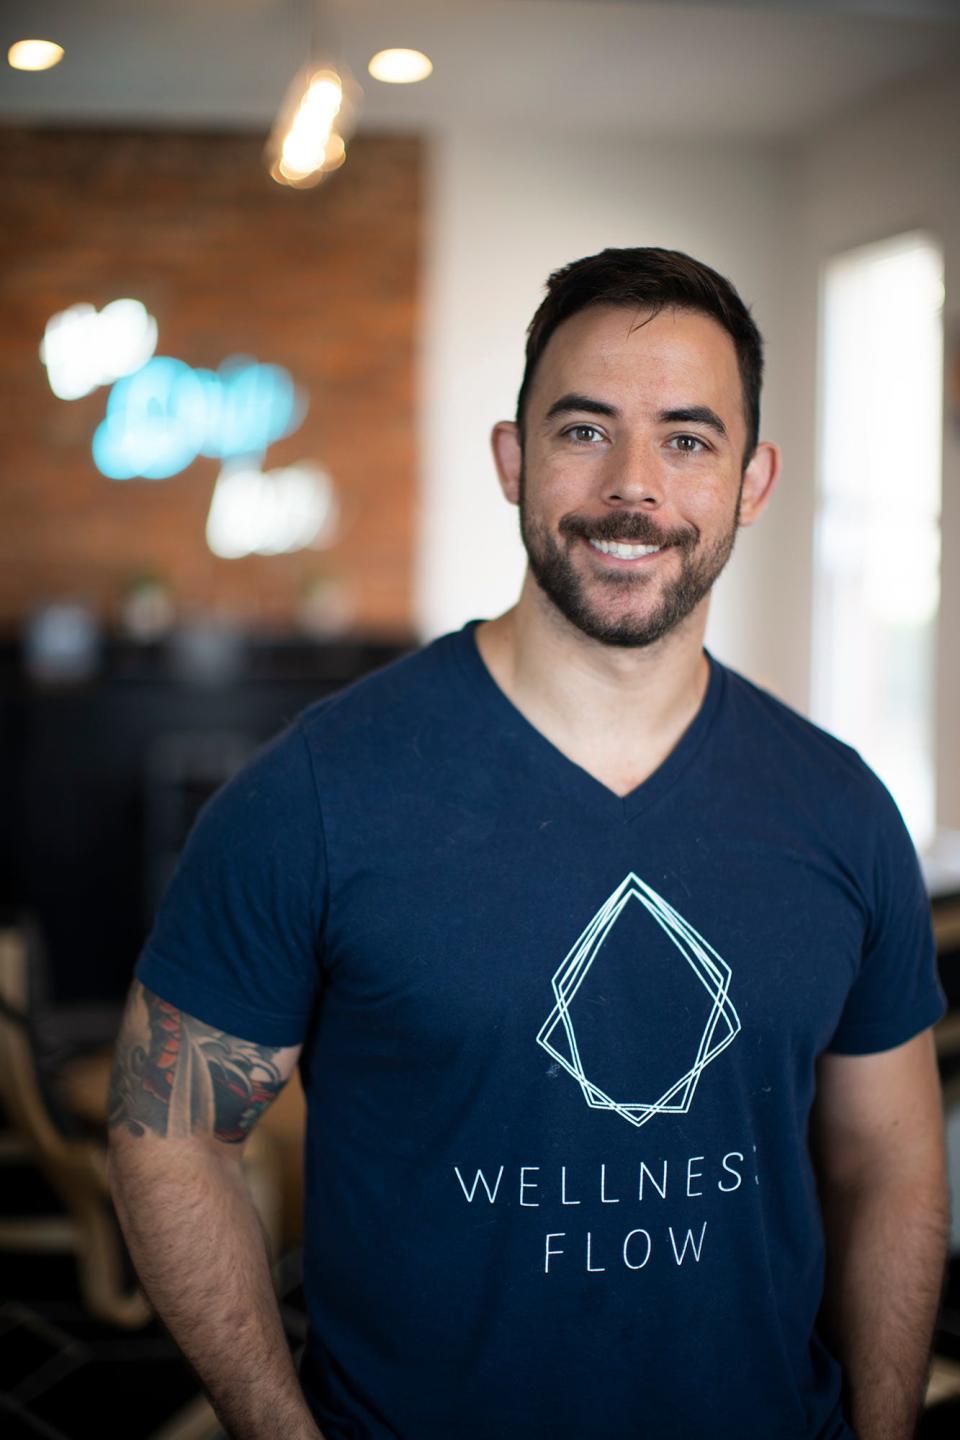 Sean Carroo, shown here in Wellness Flow's Short North studio, founded the company with Paul Adongo.